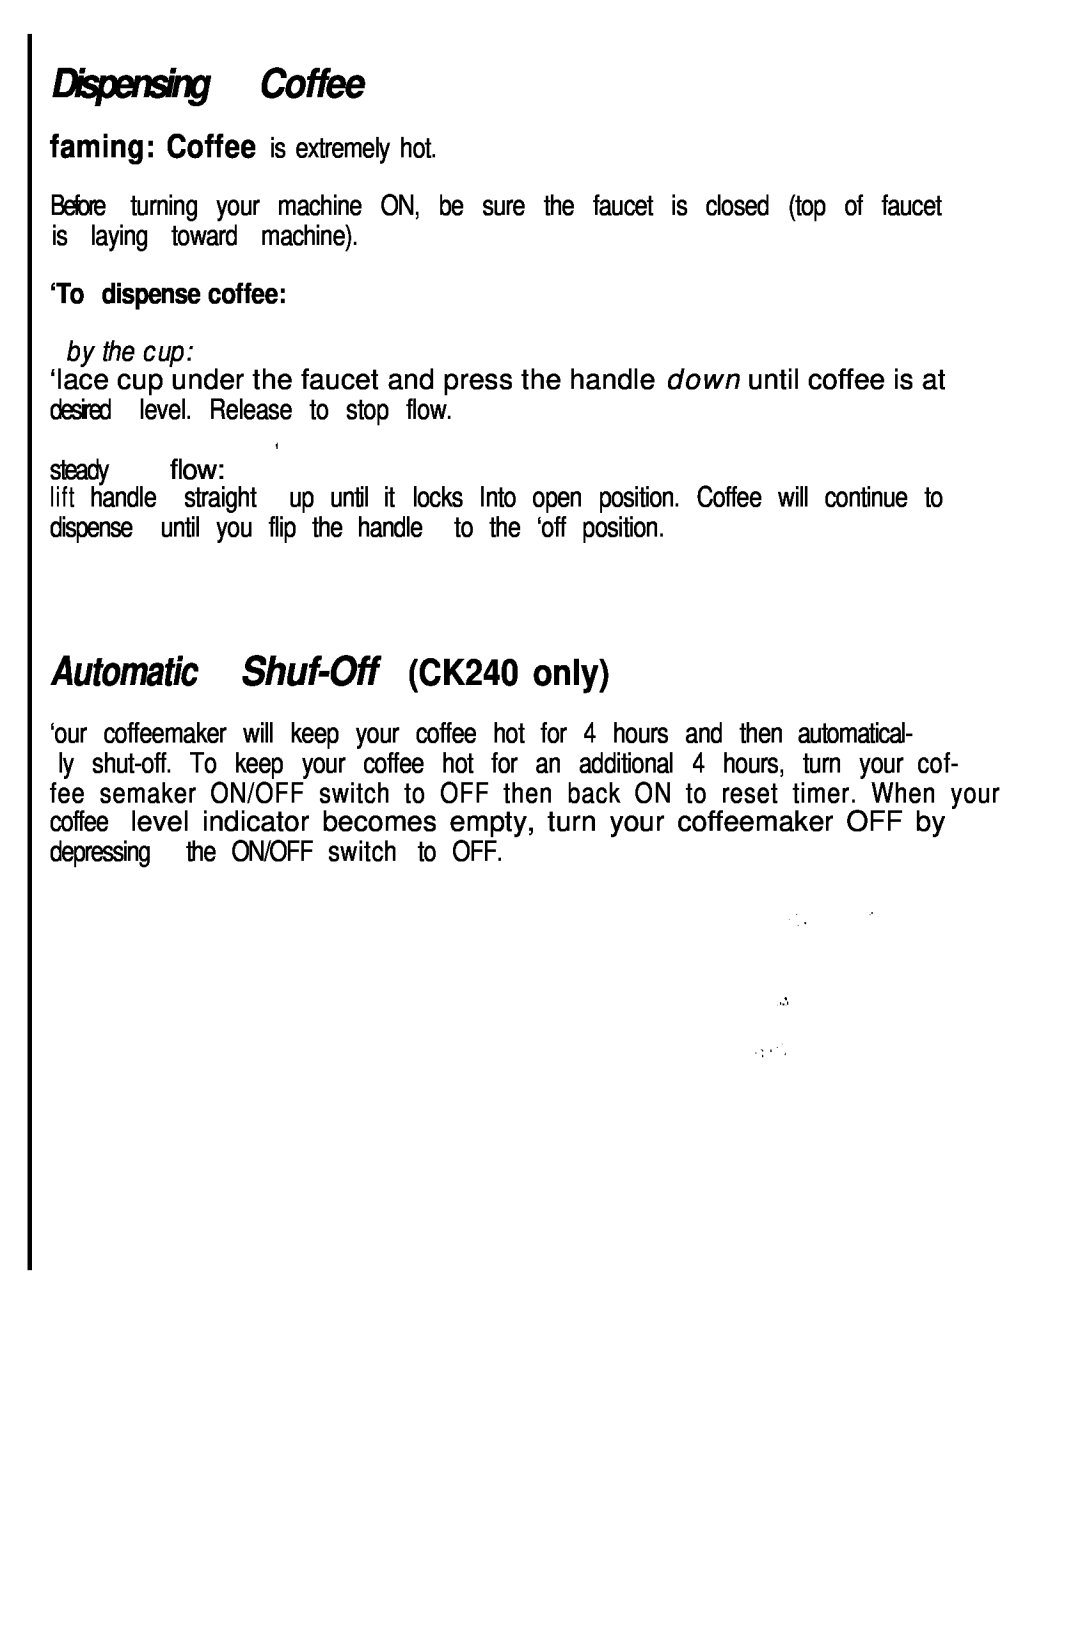 Mr. Coffee manual Coffee, Automatic, Shuf-Off CK240 only, Dispensing, dispense coffee, by the cup 